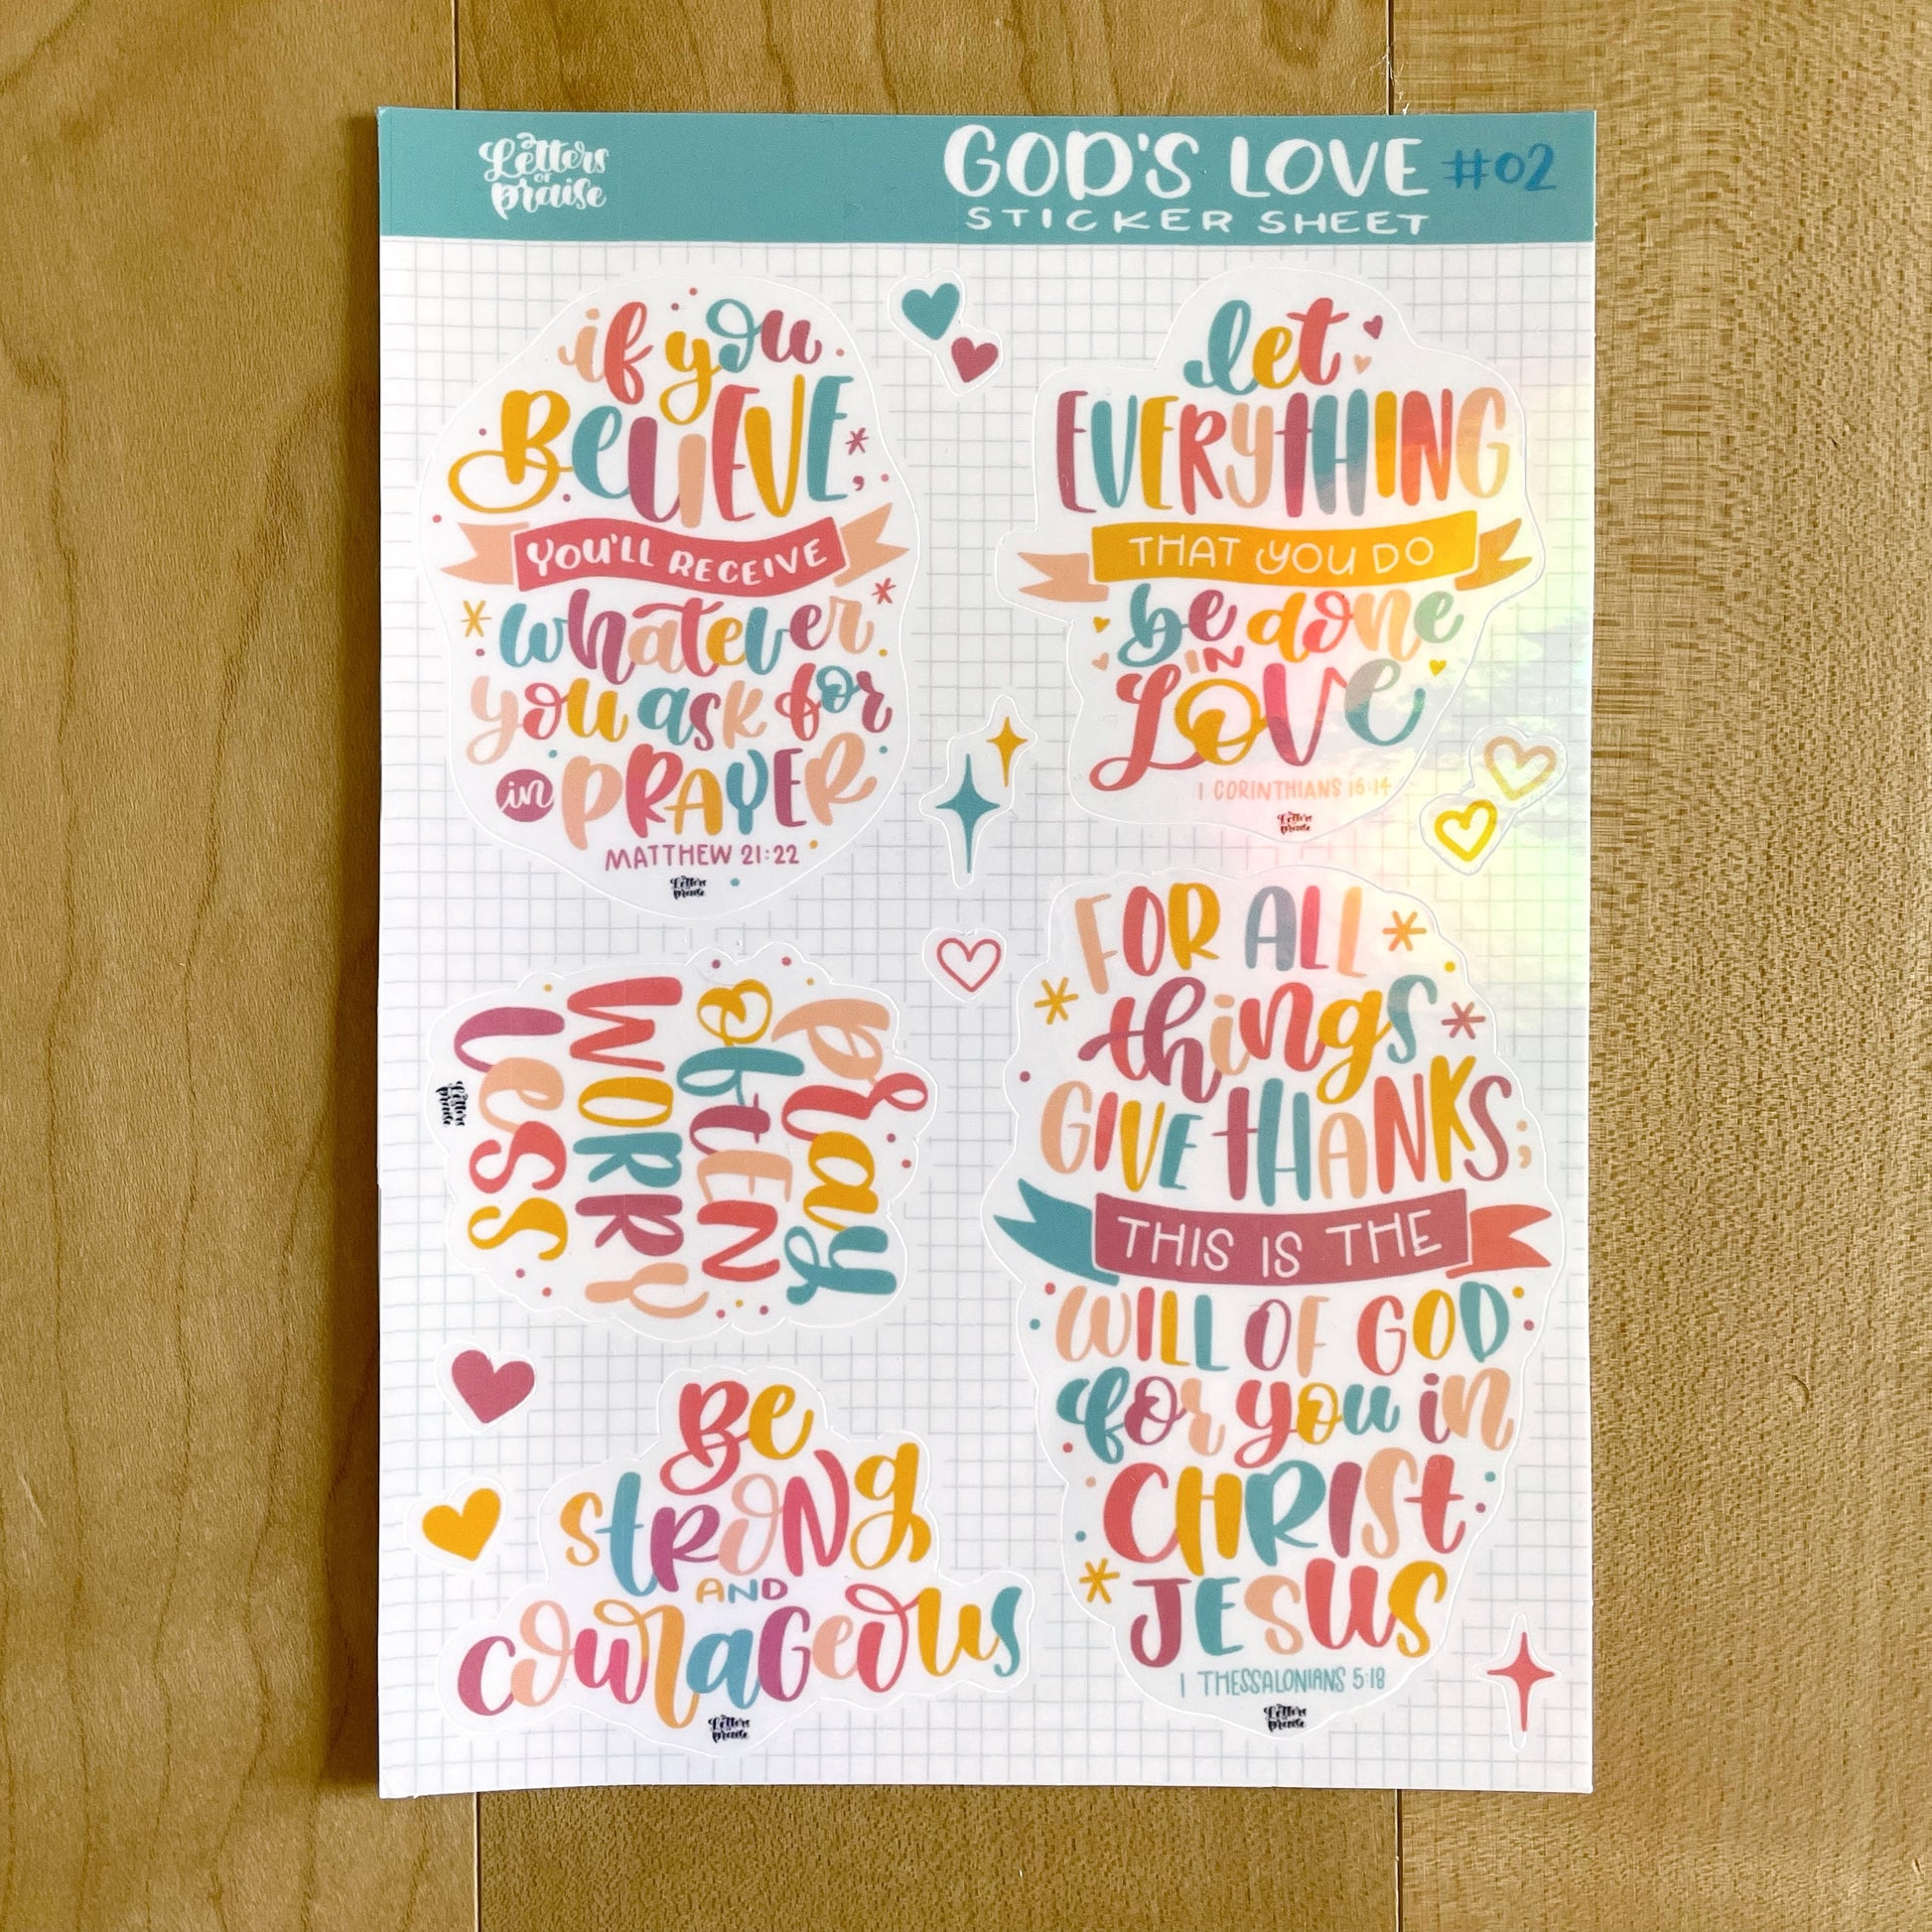 God’s Love #02 Christian Sticker Sheet for Bible Journaling, Bullet  Journalling and decorating (Waterproof, Holographic)